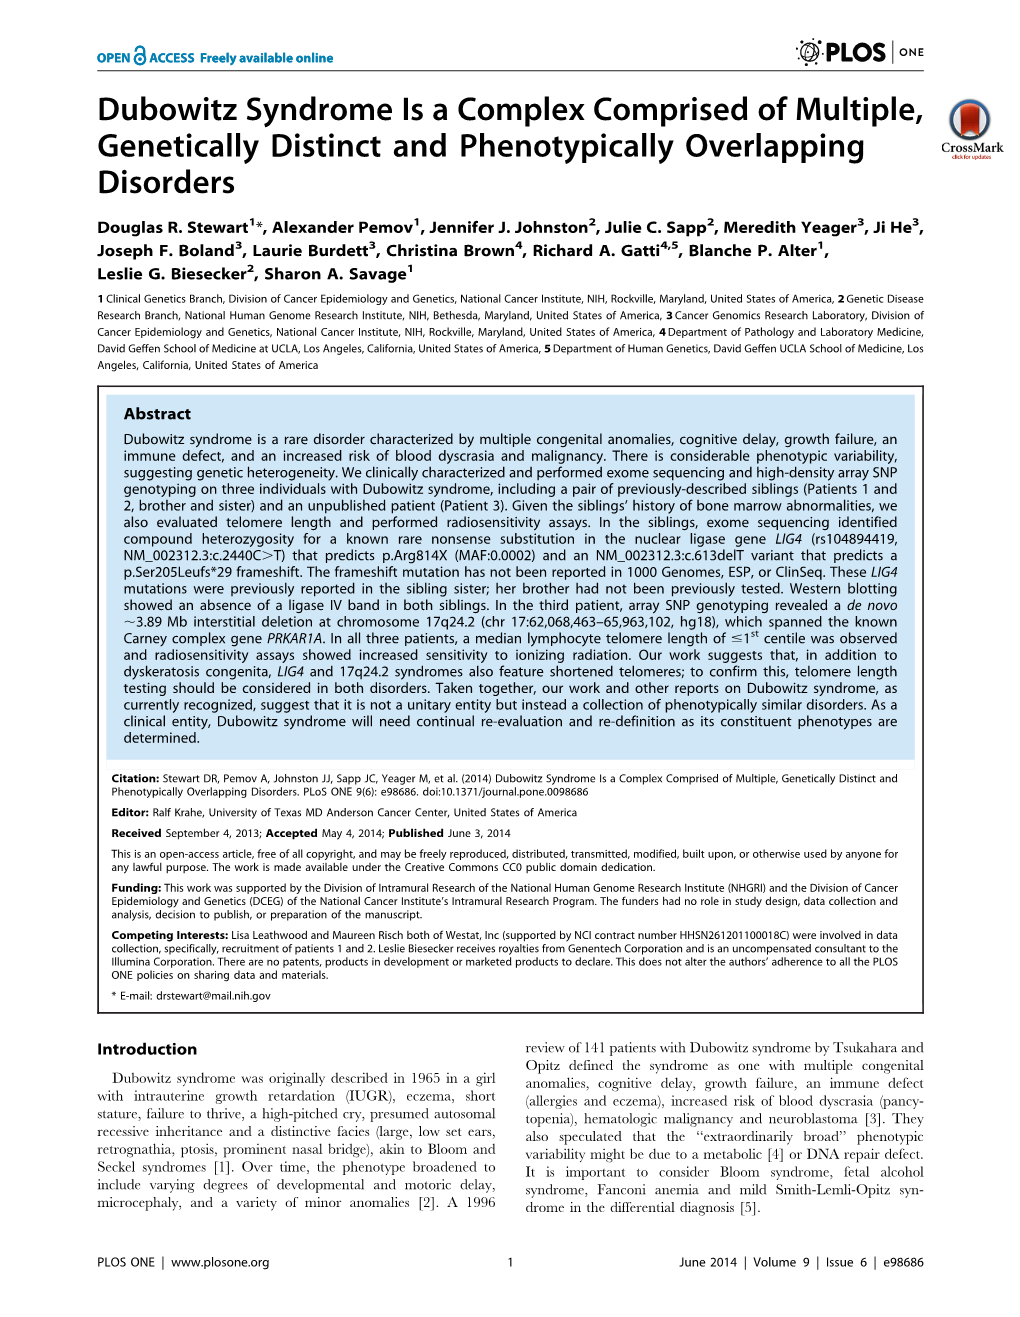 Dubowitz Syndrome Is a Complex Comprised of Multiple, Genetically Distinct and Phenotypically Overlapping Disorders